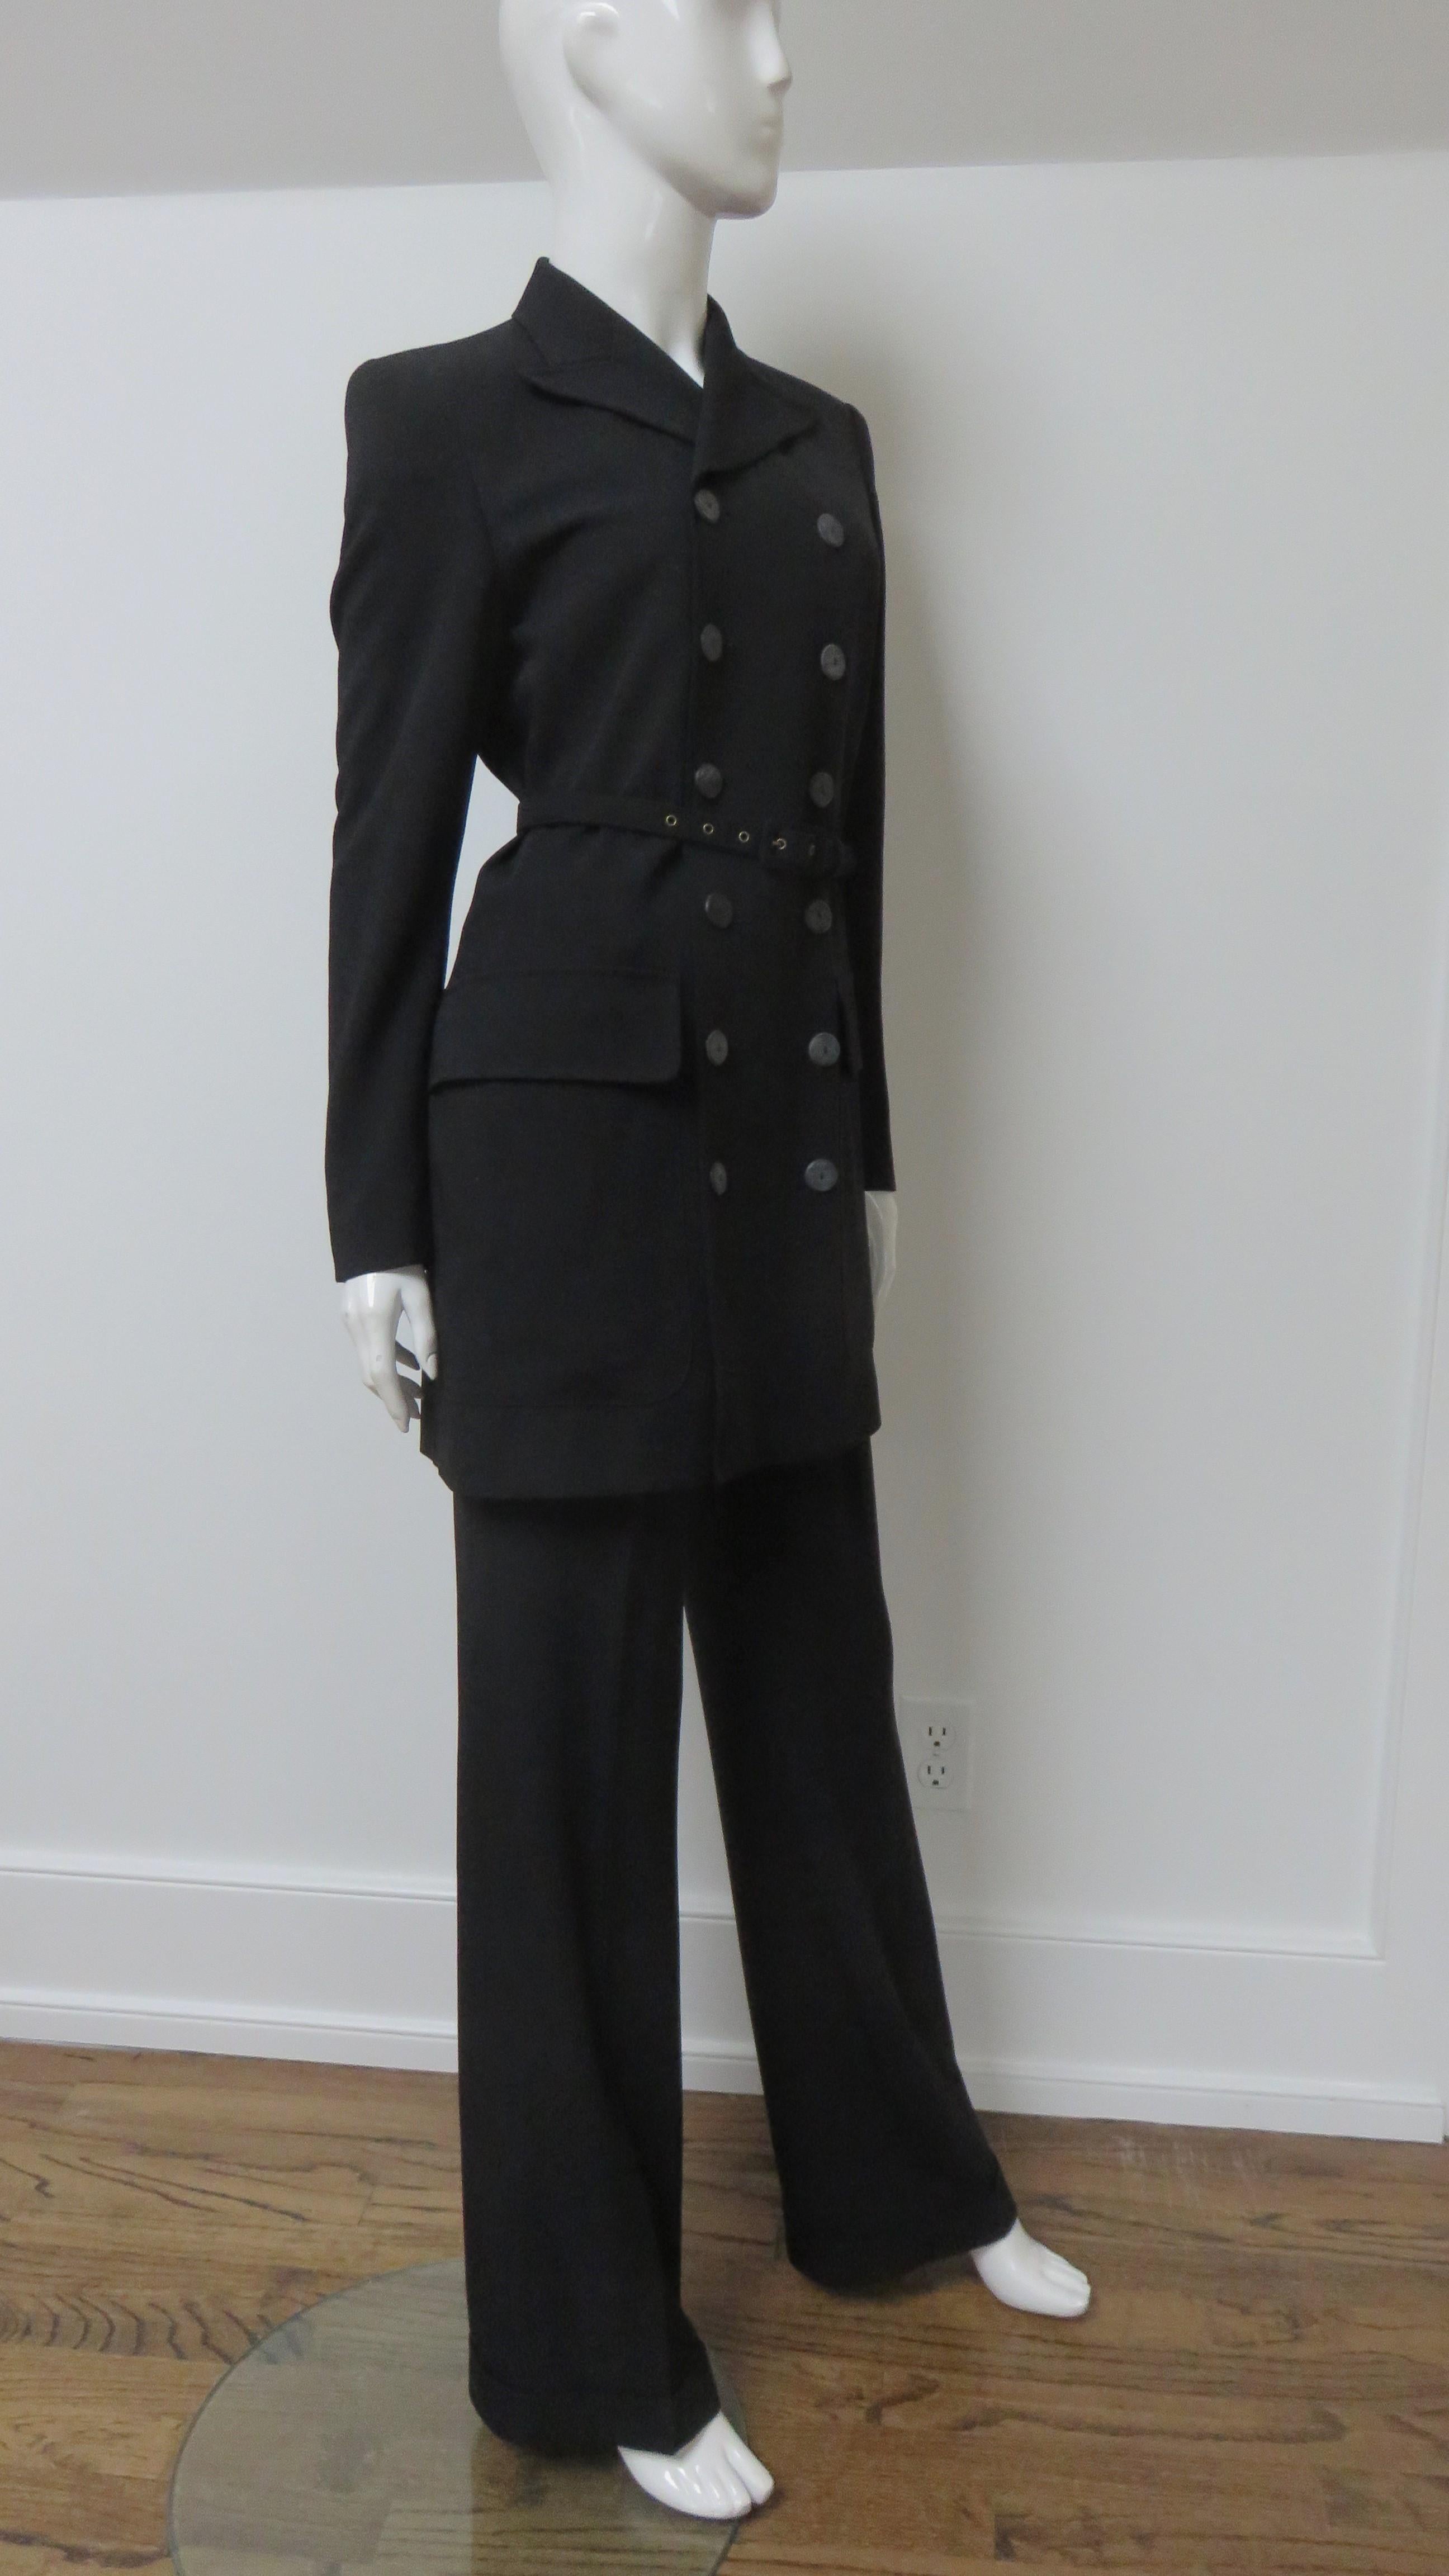 Jean Paul Gaultier Double Breasted Belted Pant Suit A/W 1999 For Sale 9